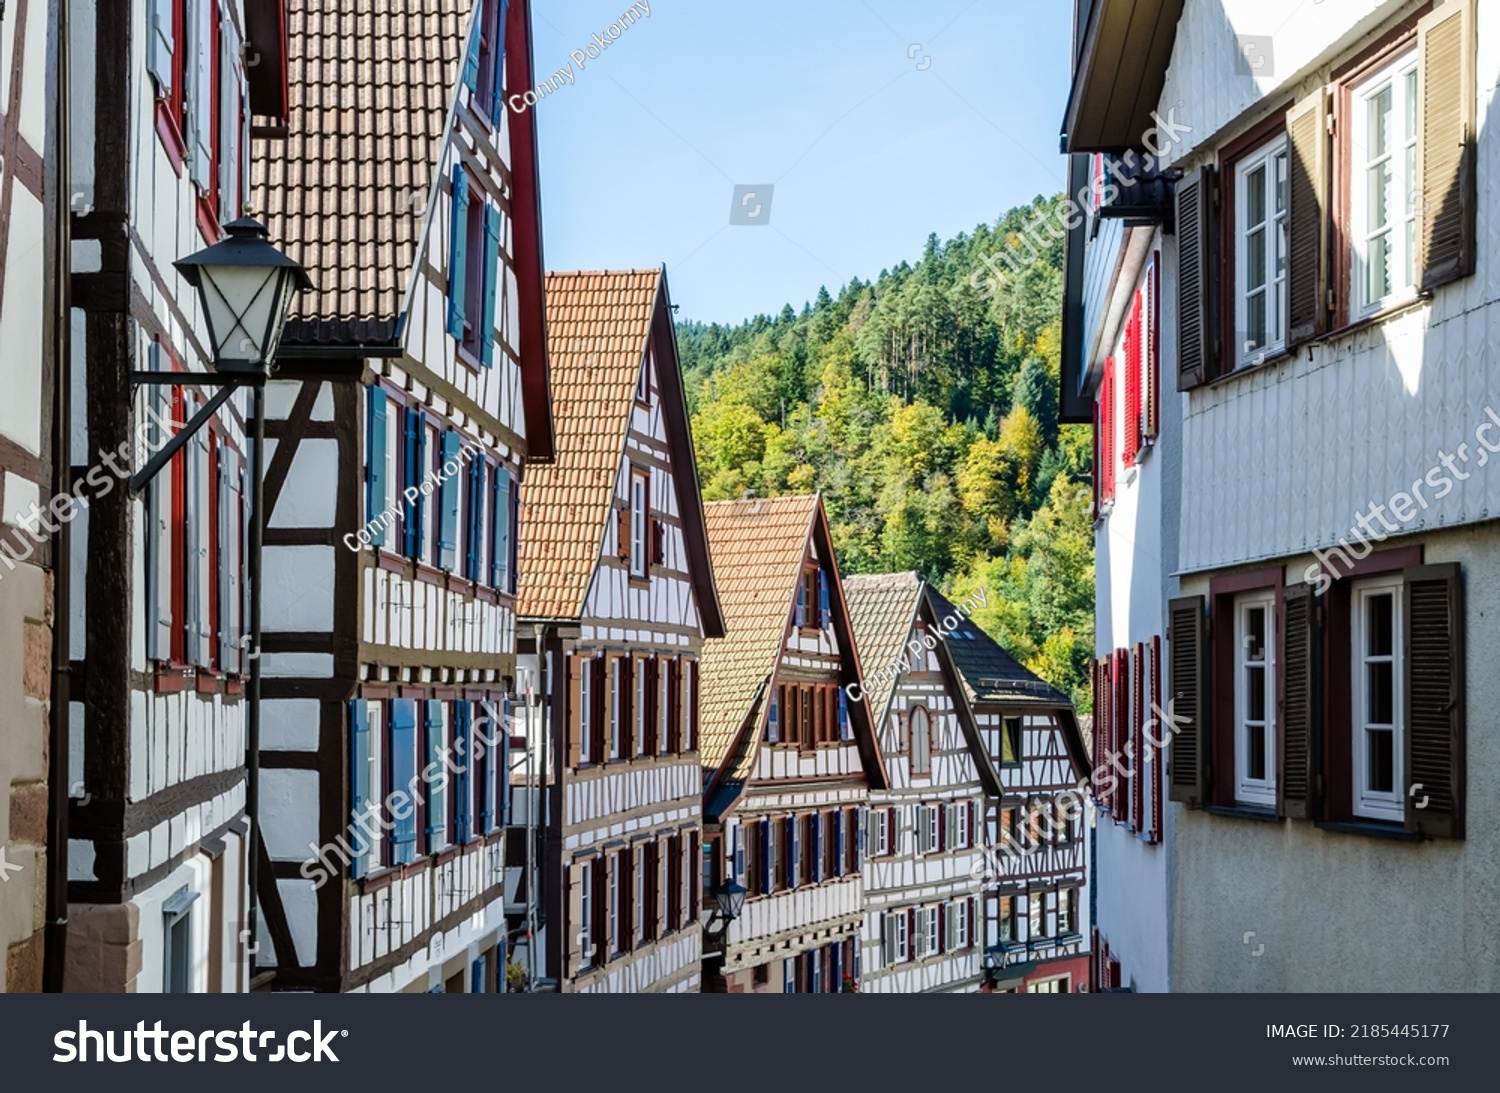 Half-timbered houses in Schiltach in Black Forest, Kinzigtal, Baden-W+rttemberg, Germany #2185445177